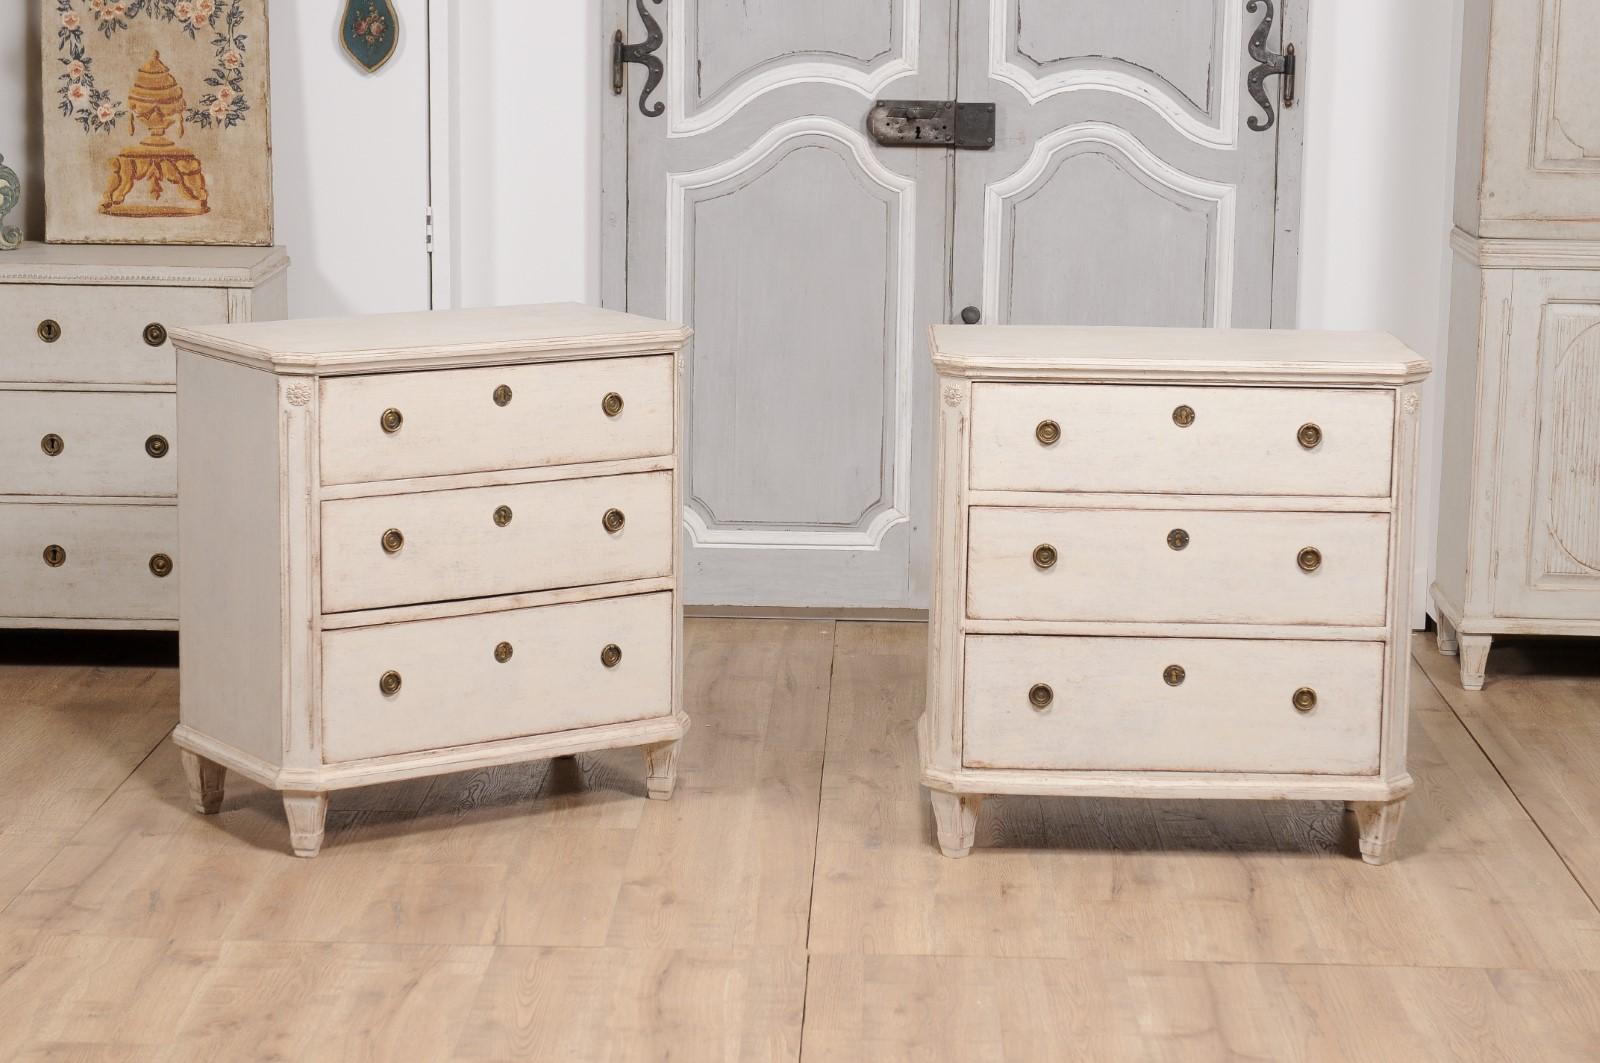 Carved 19th Century Swedish Gustavian Style Painted Three-Drawer Chests, a Pair For Sale